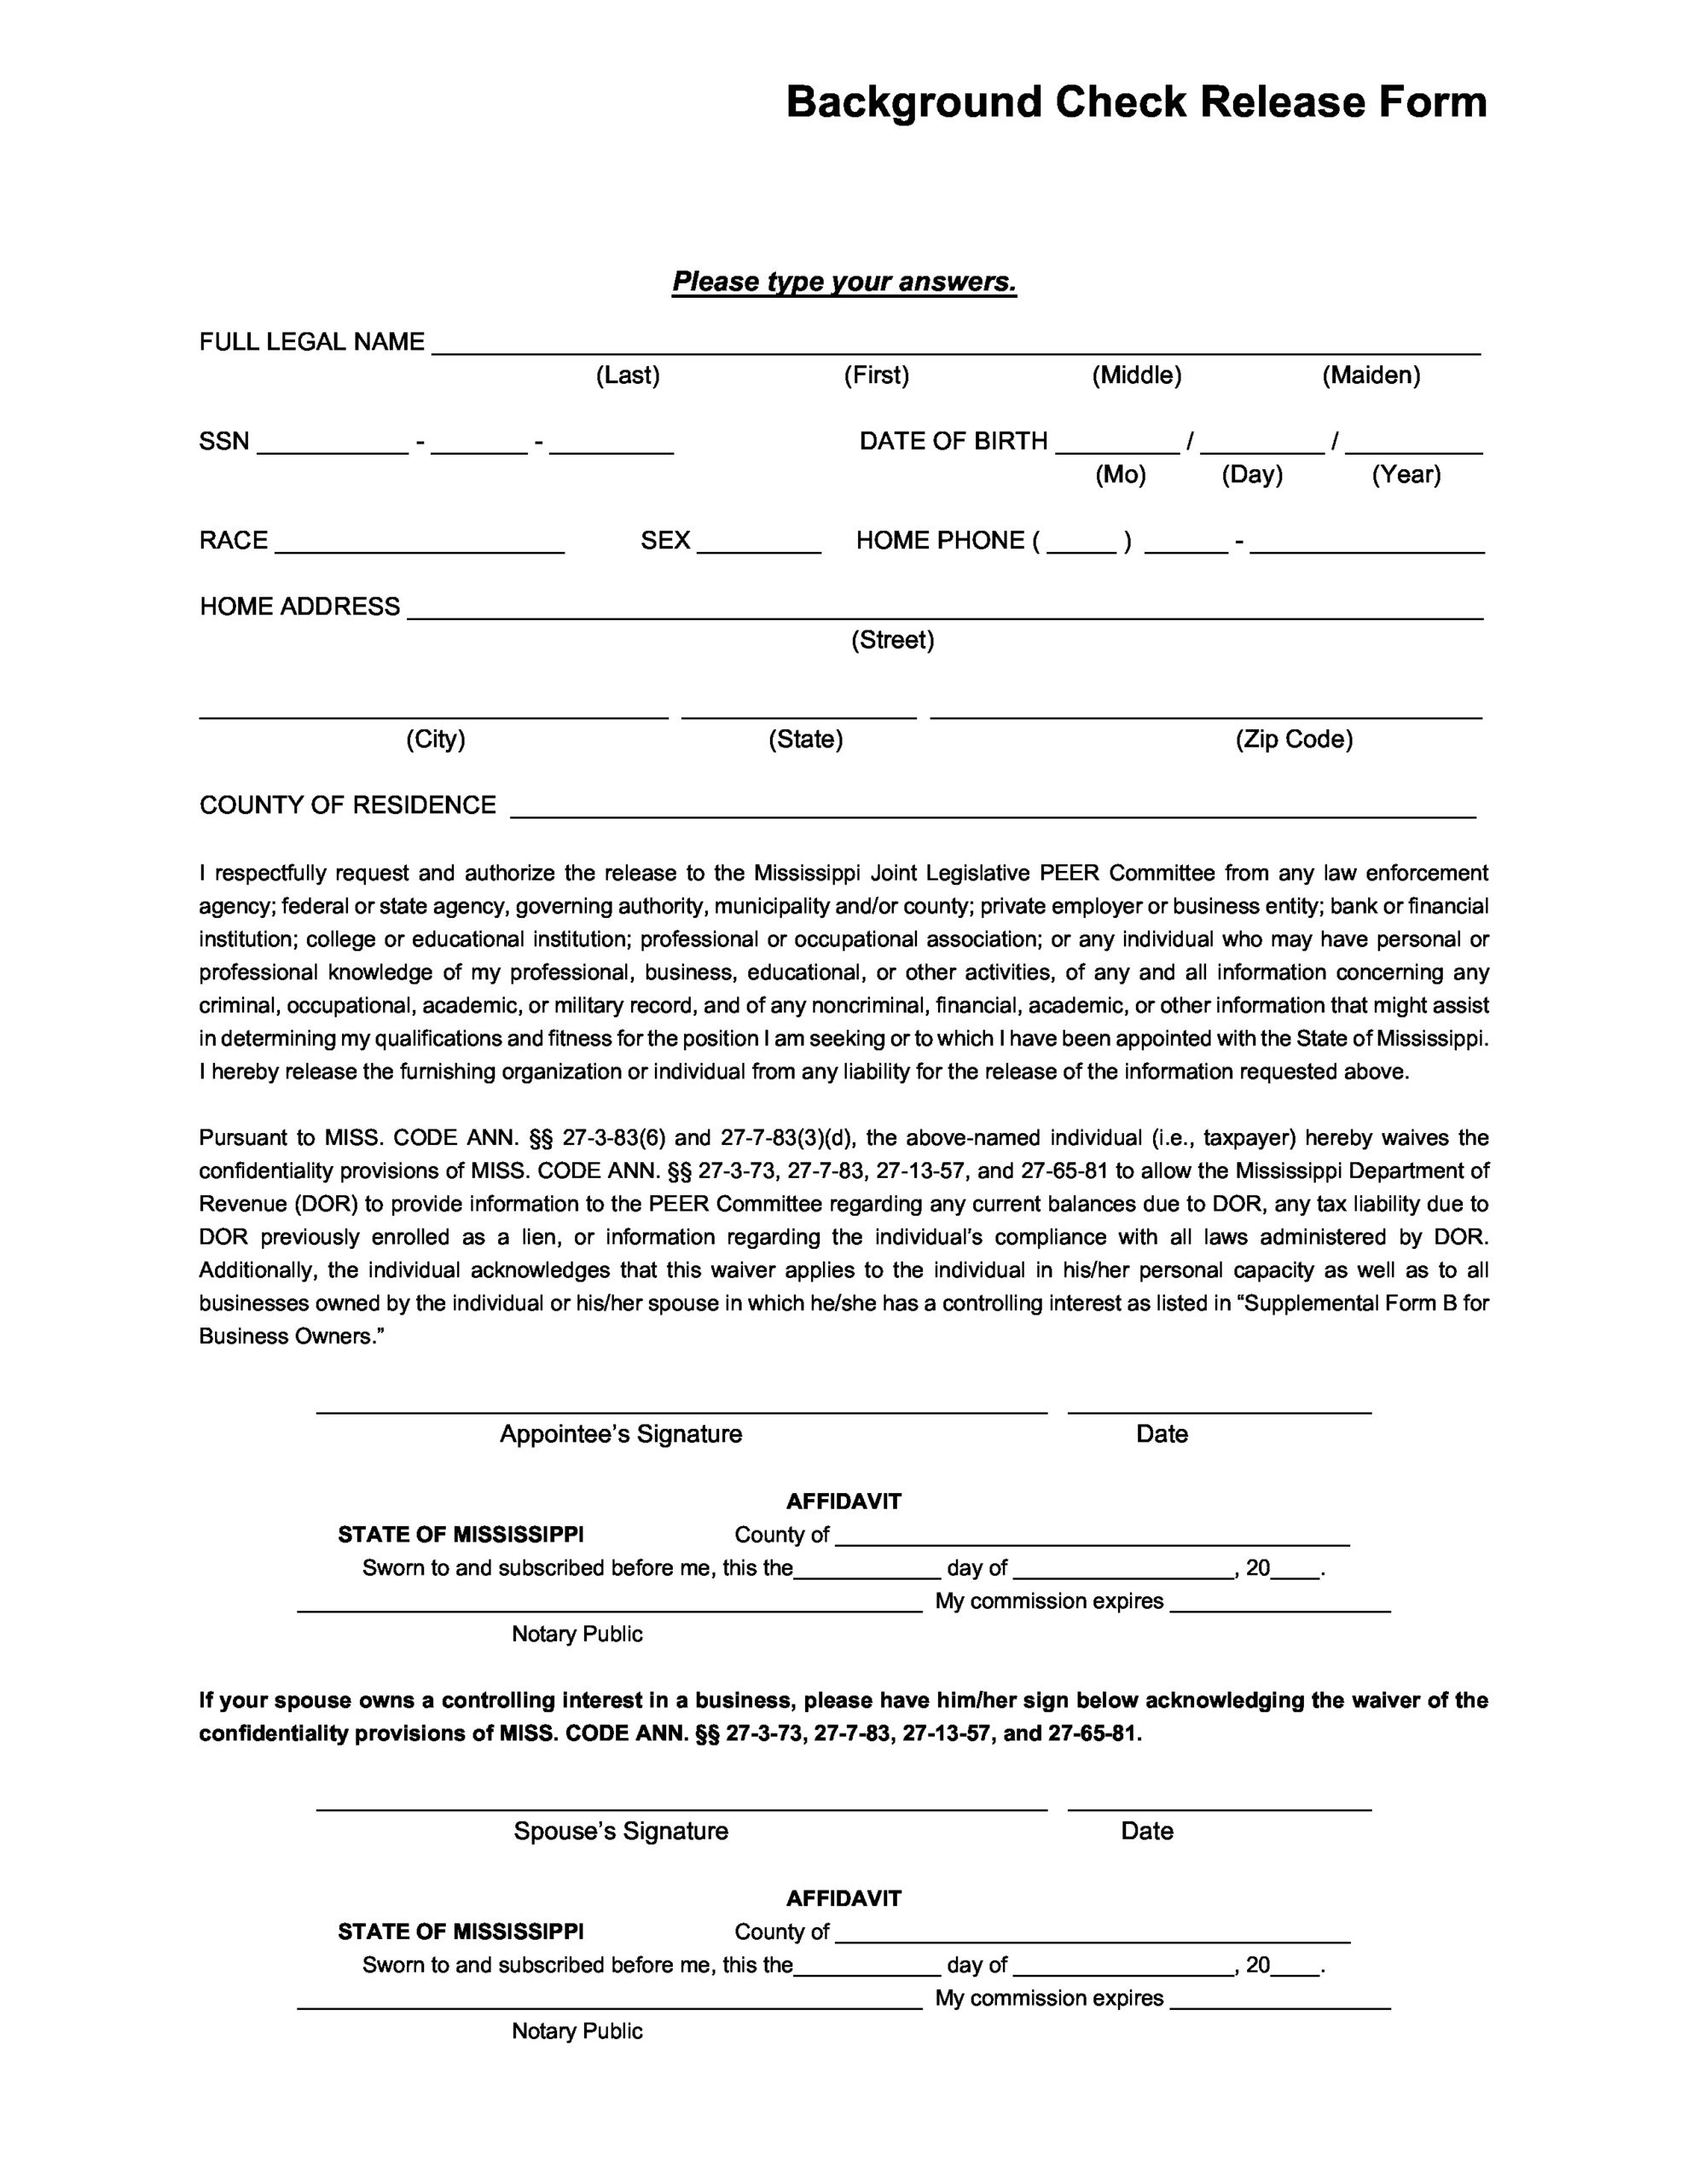 Free background check form 28